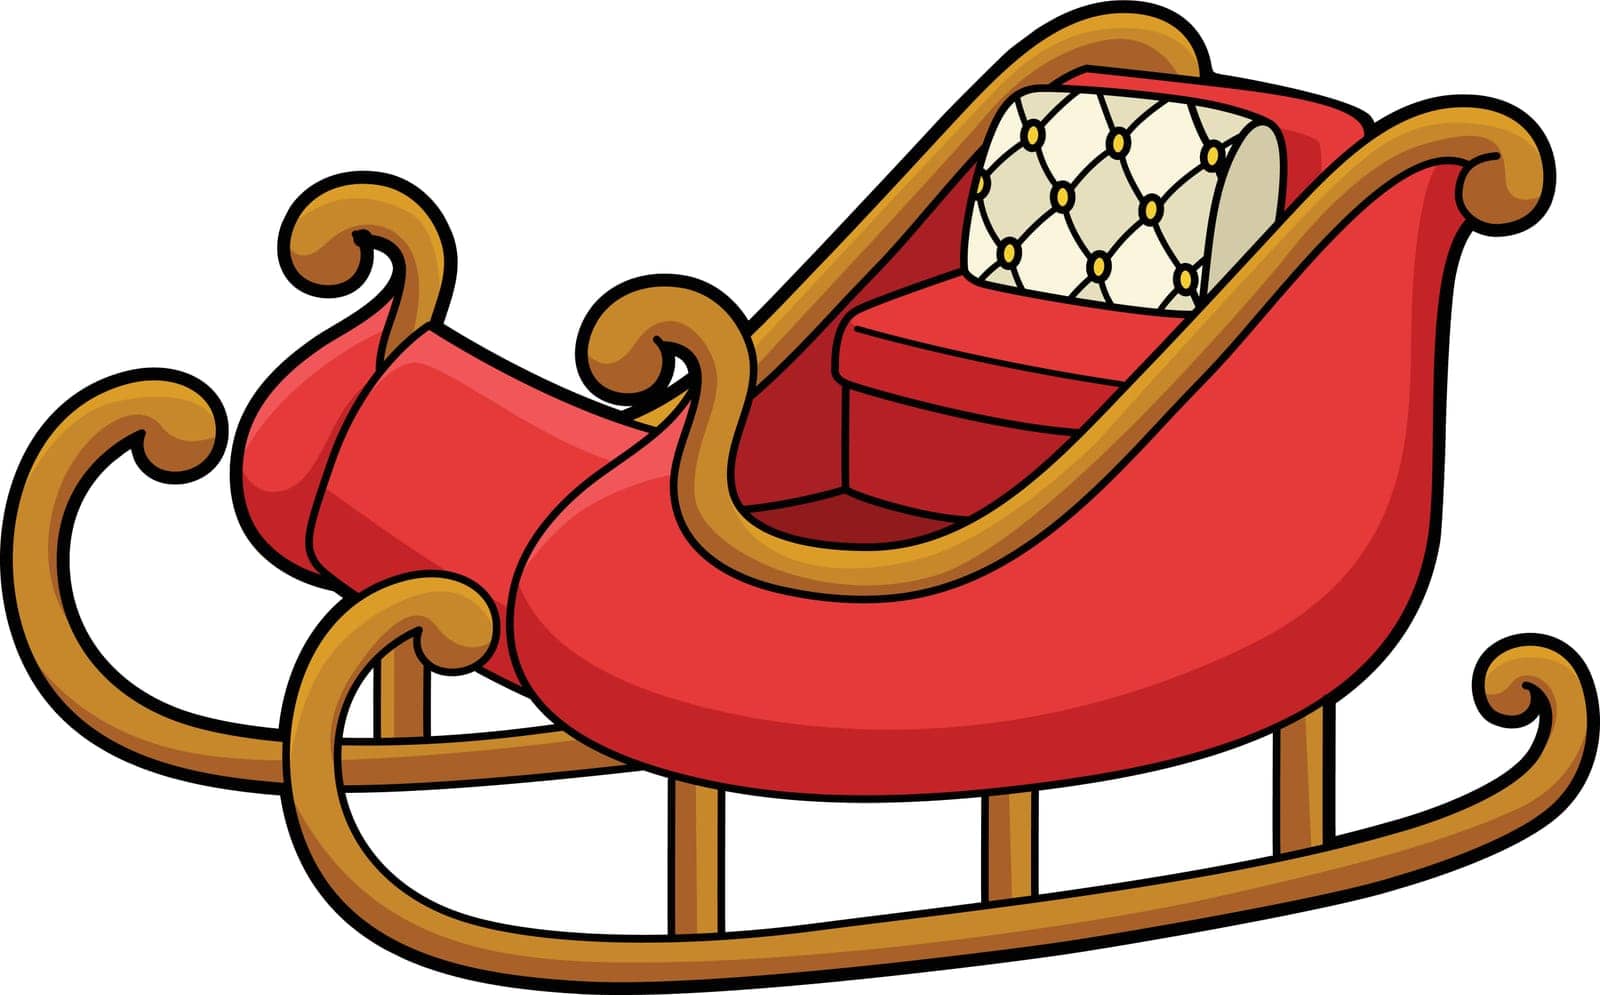 Sleigh Vehicle Cartoon Colored Clipart by abbydesign